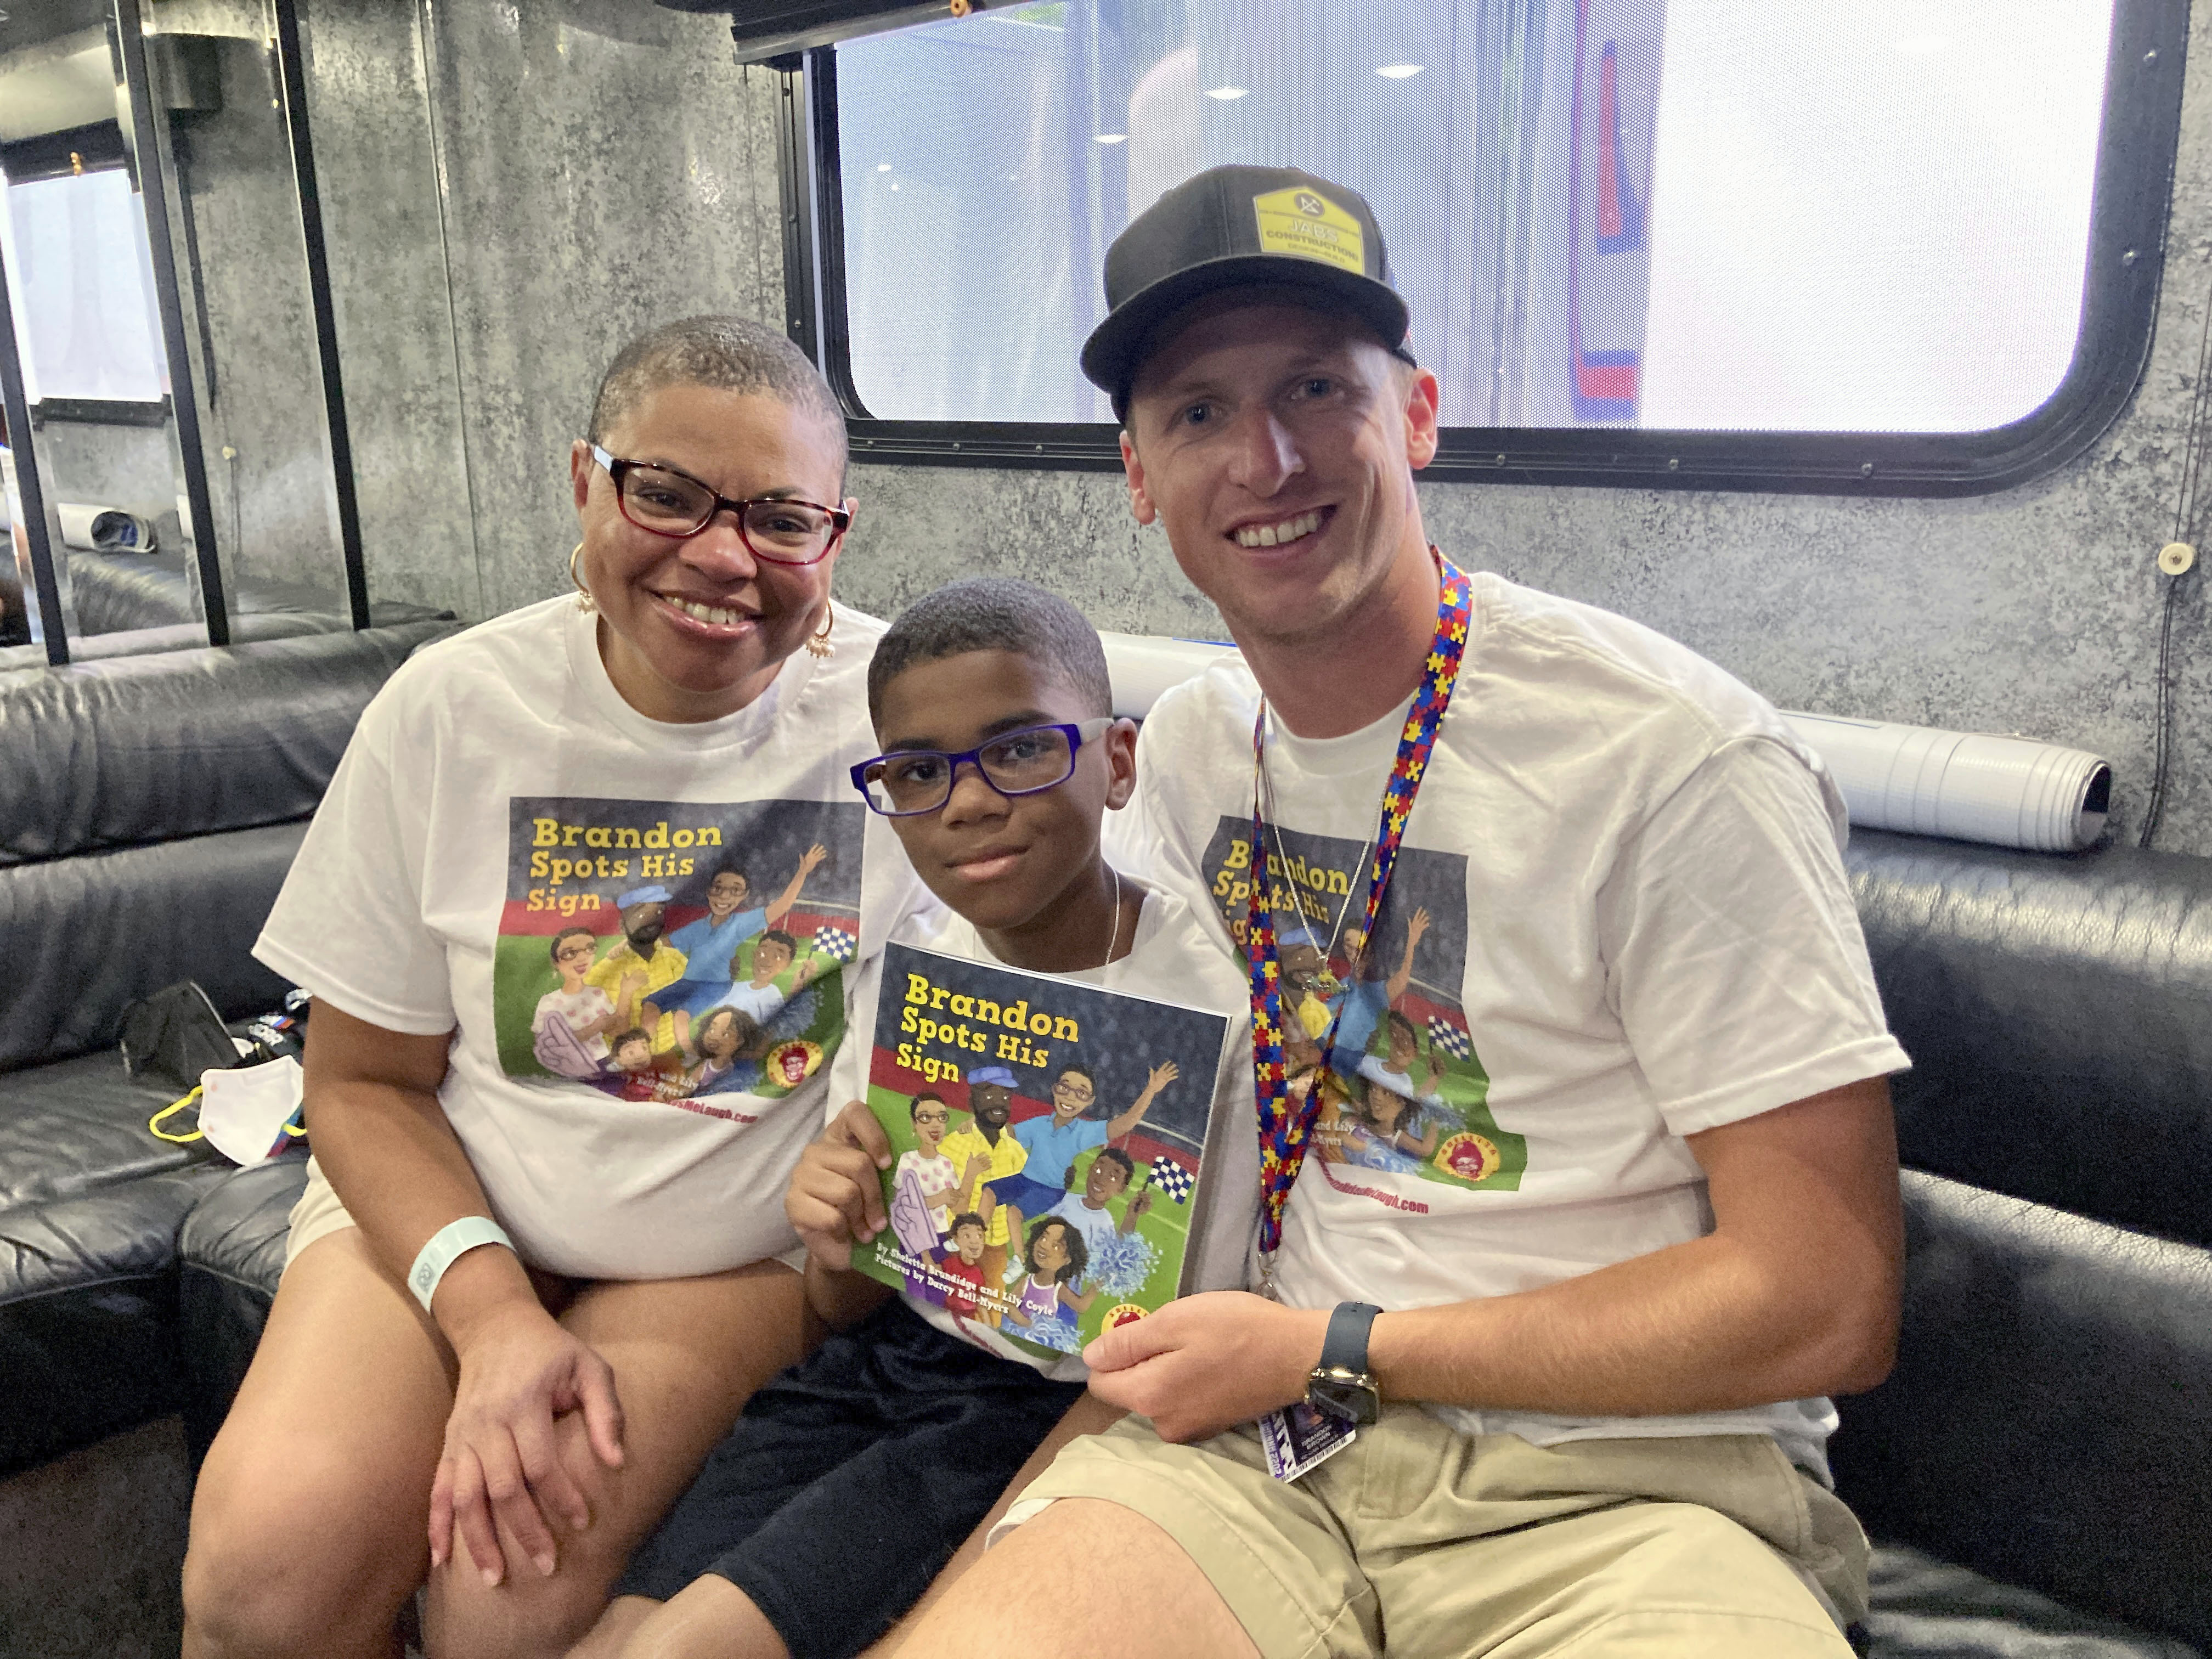 Child helps NASCAR's Brandon Brown give new meaning to 'Let's go